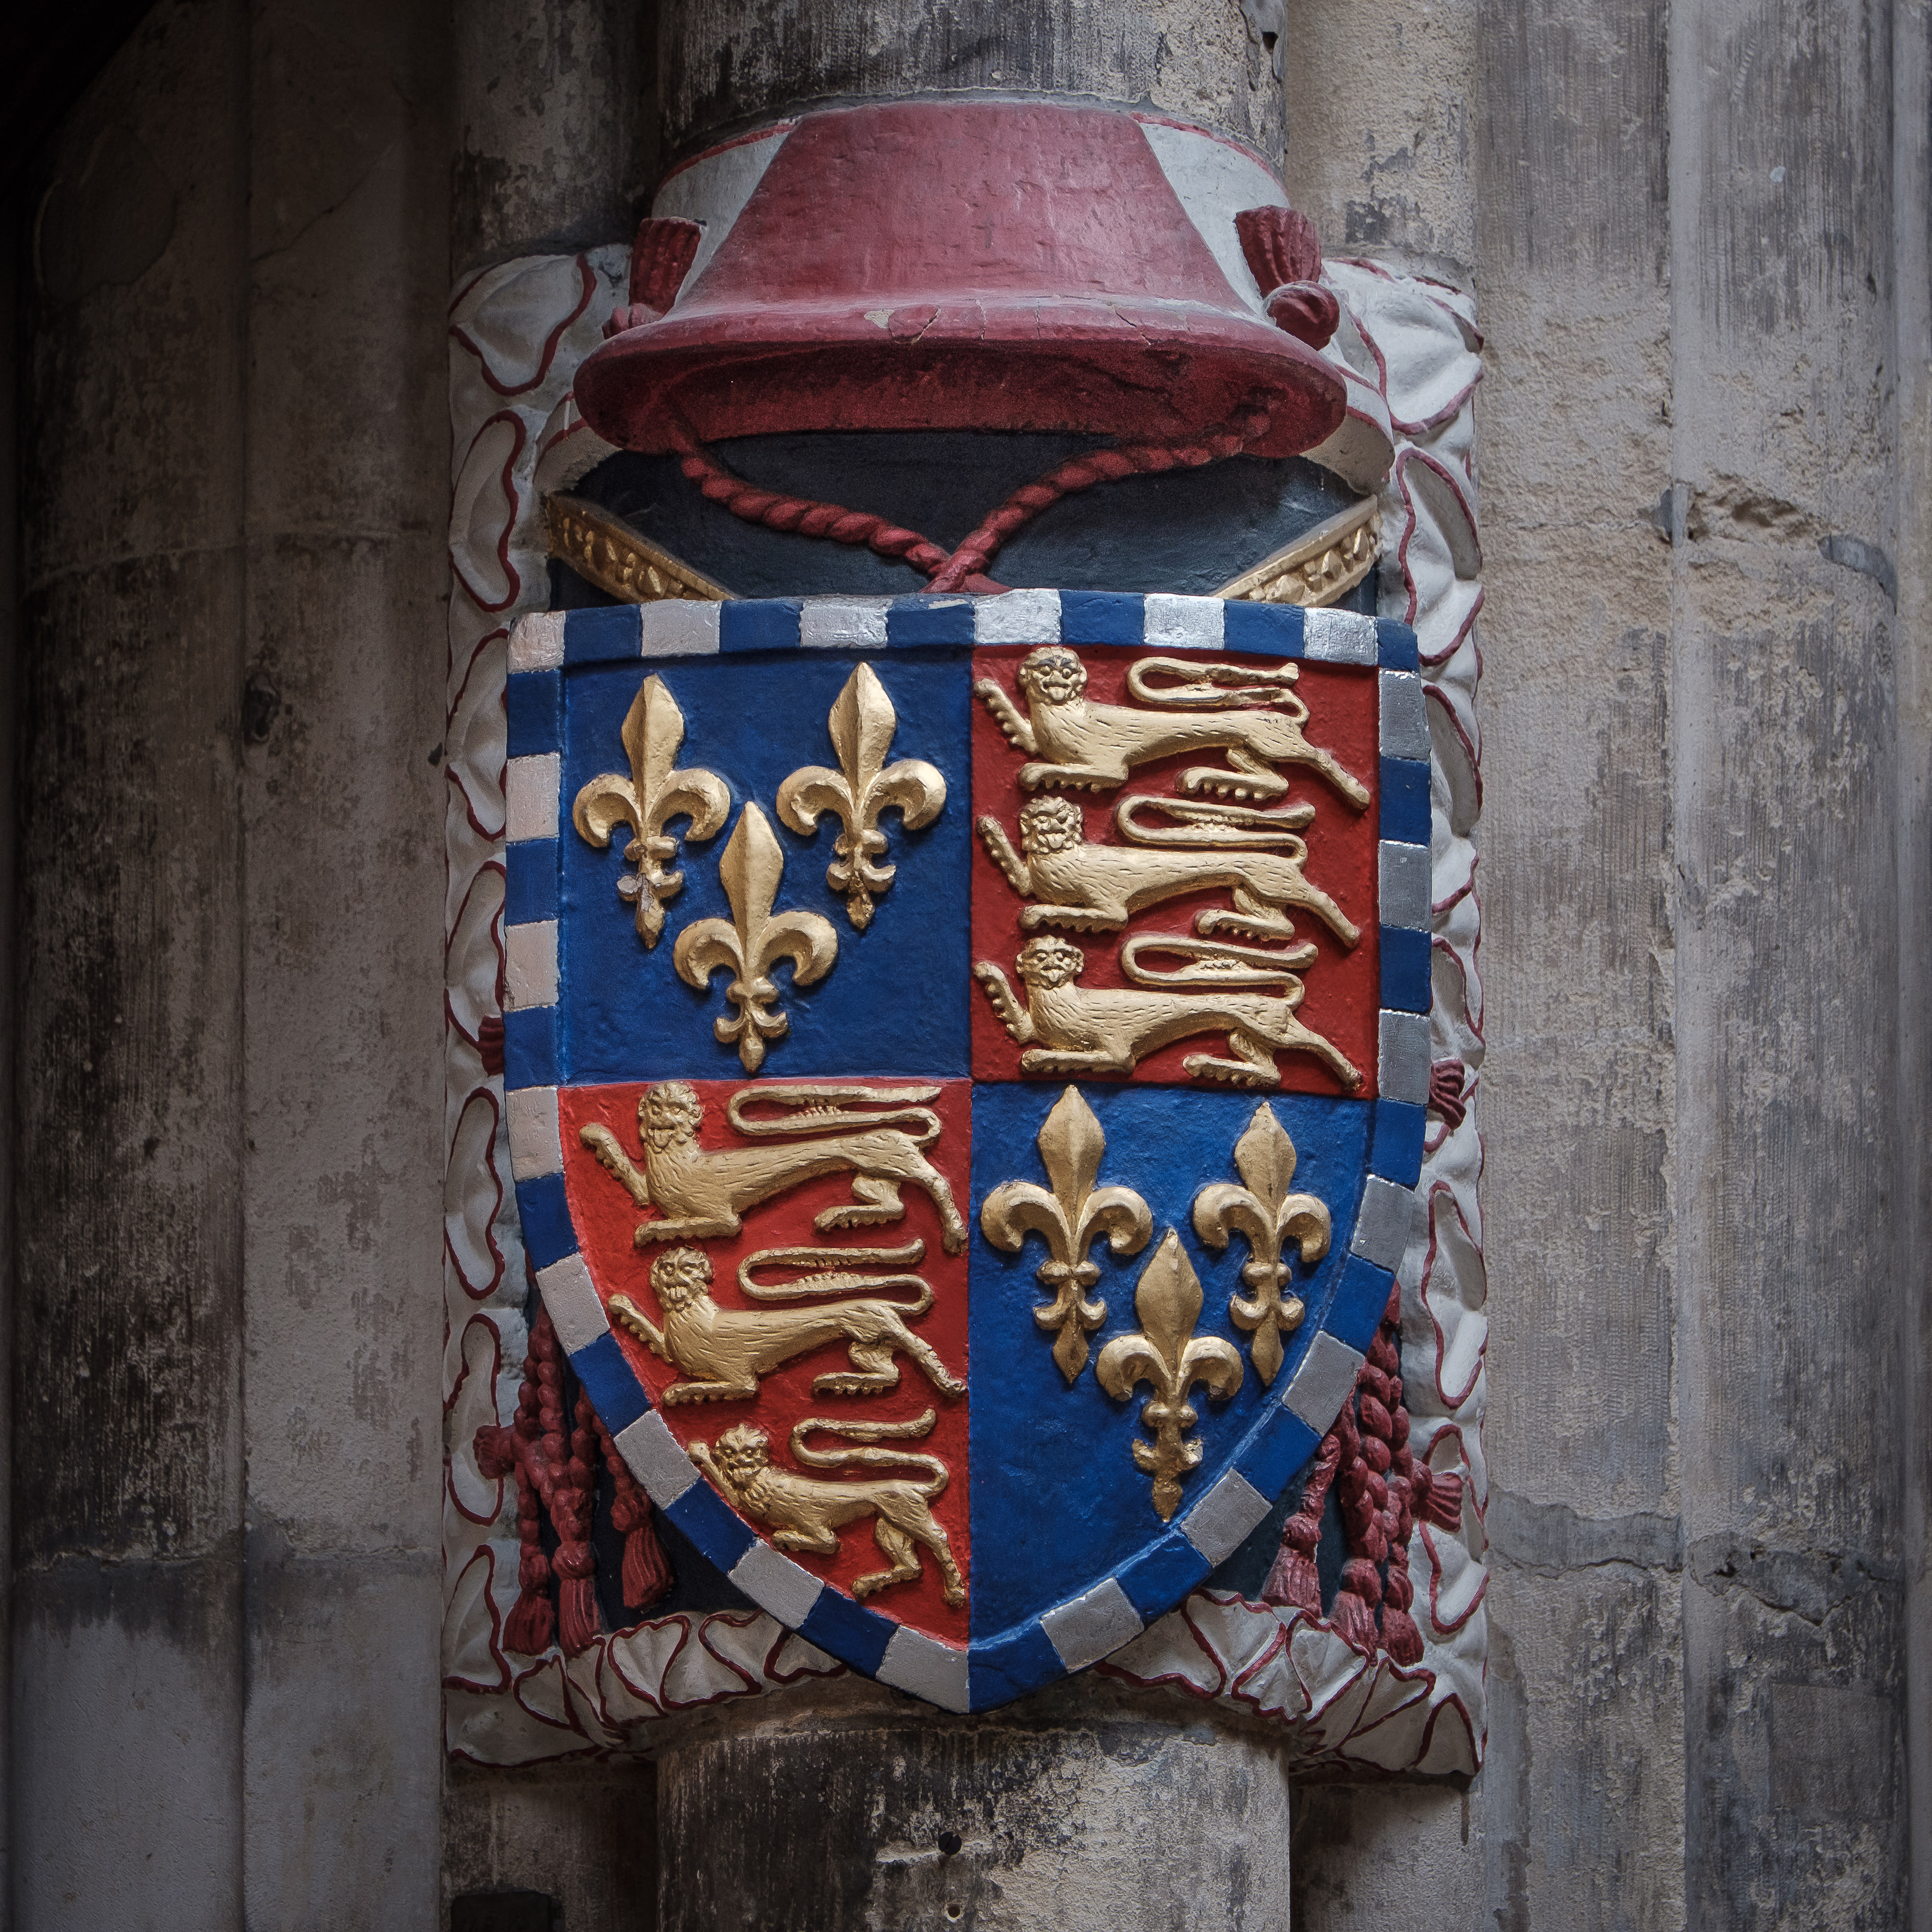 Beaufort Coat of Arms (C) Southwark Cathedral